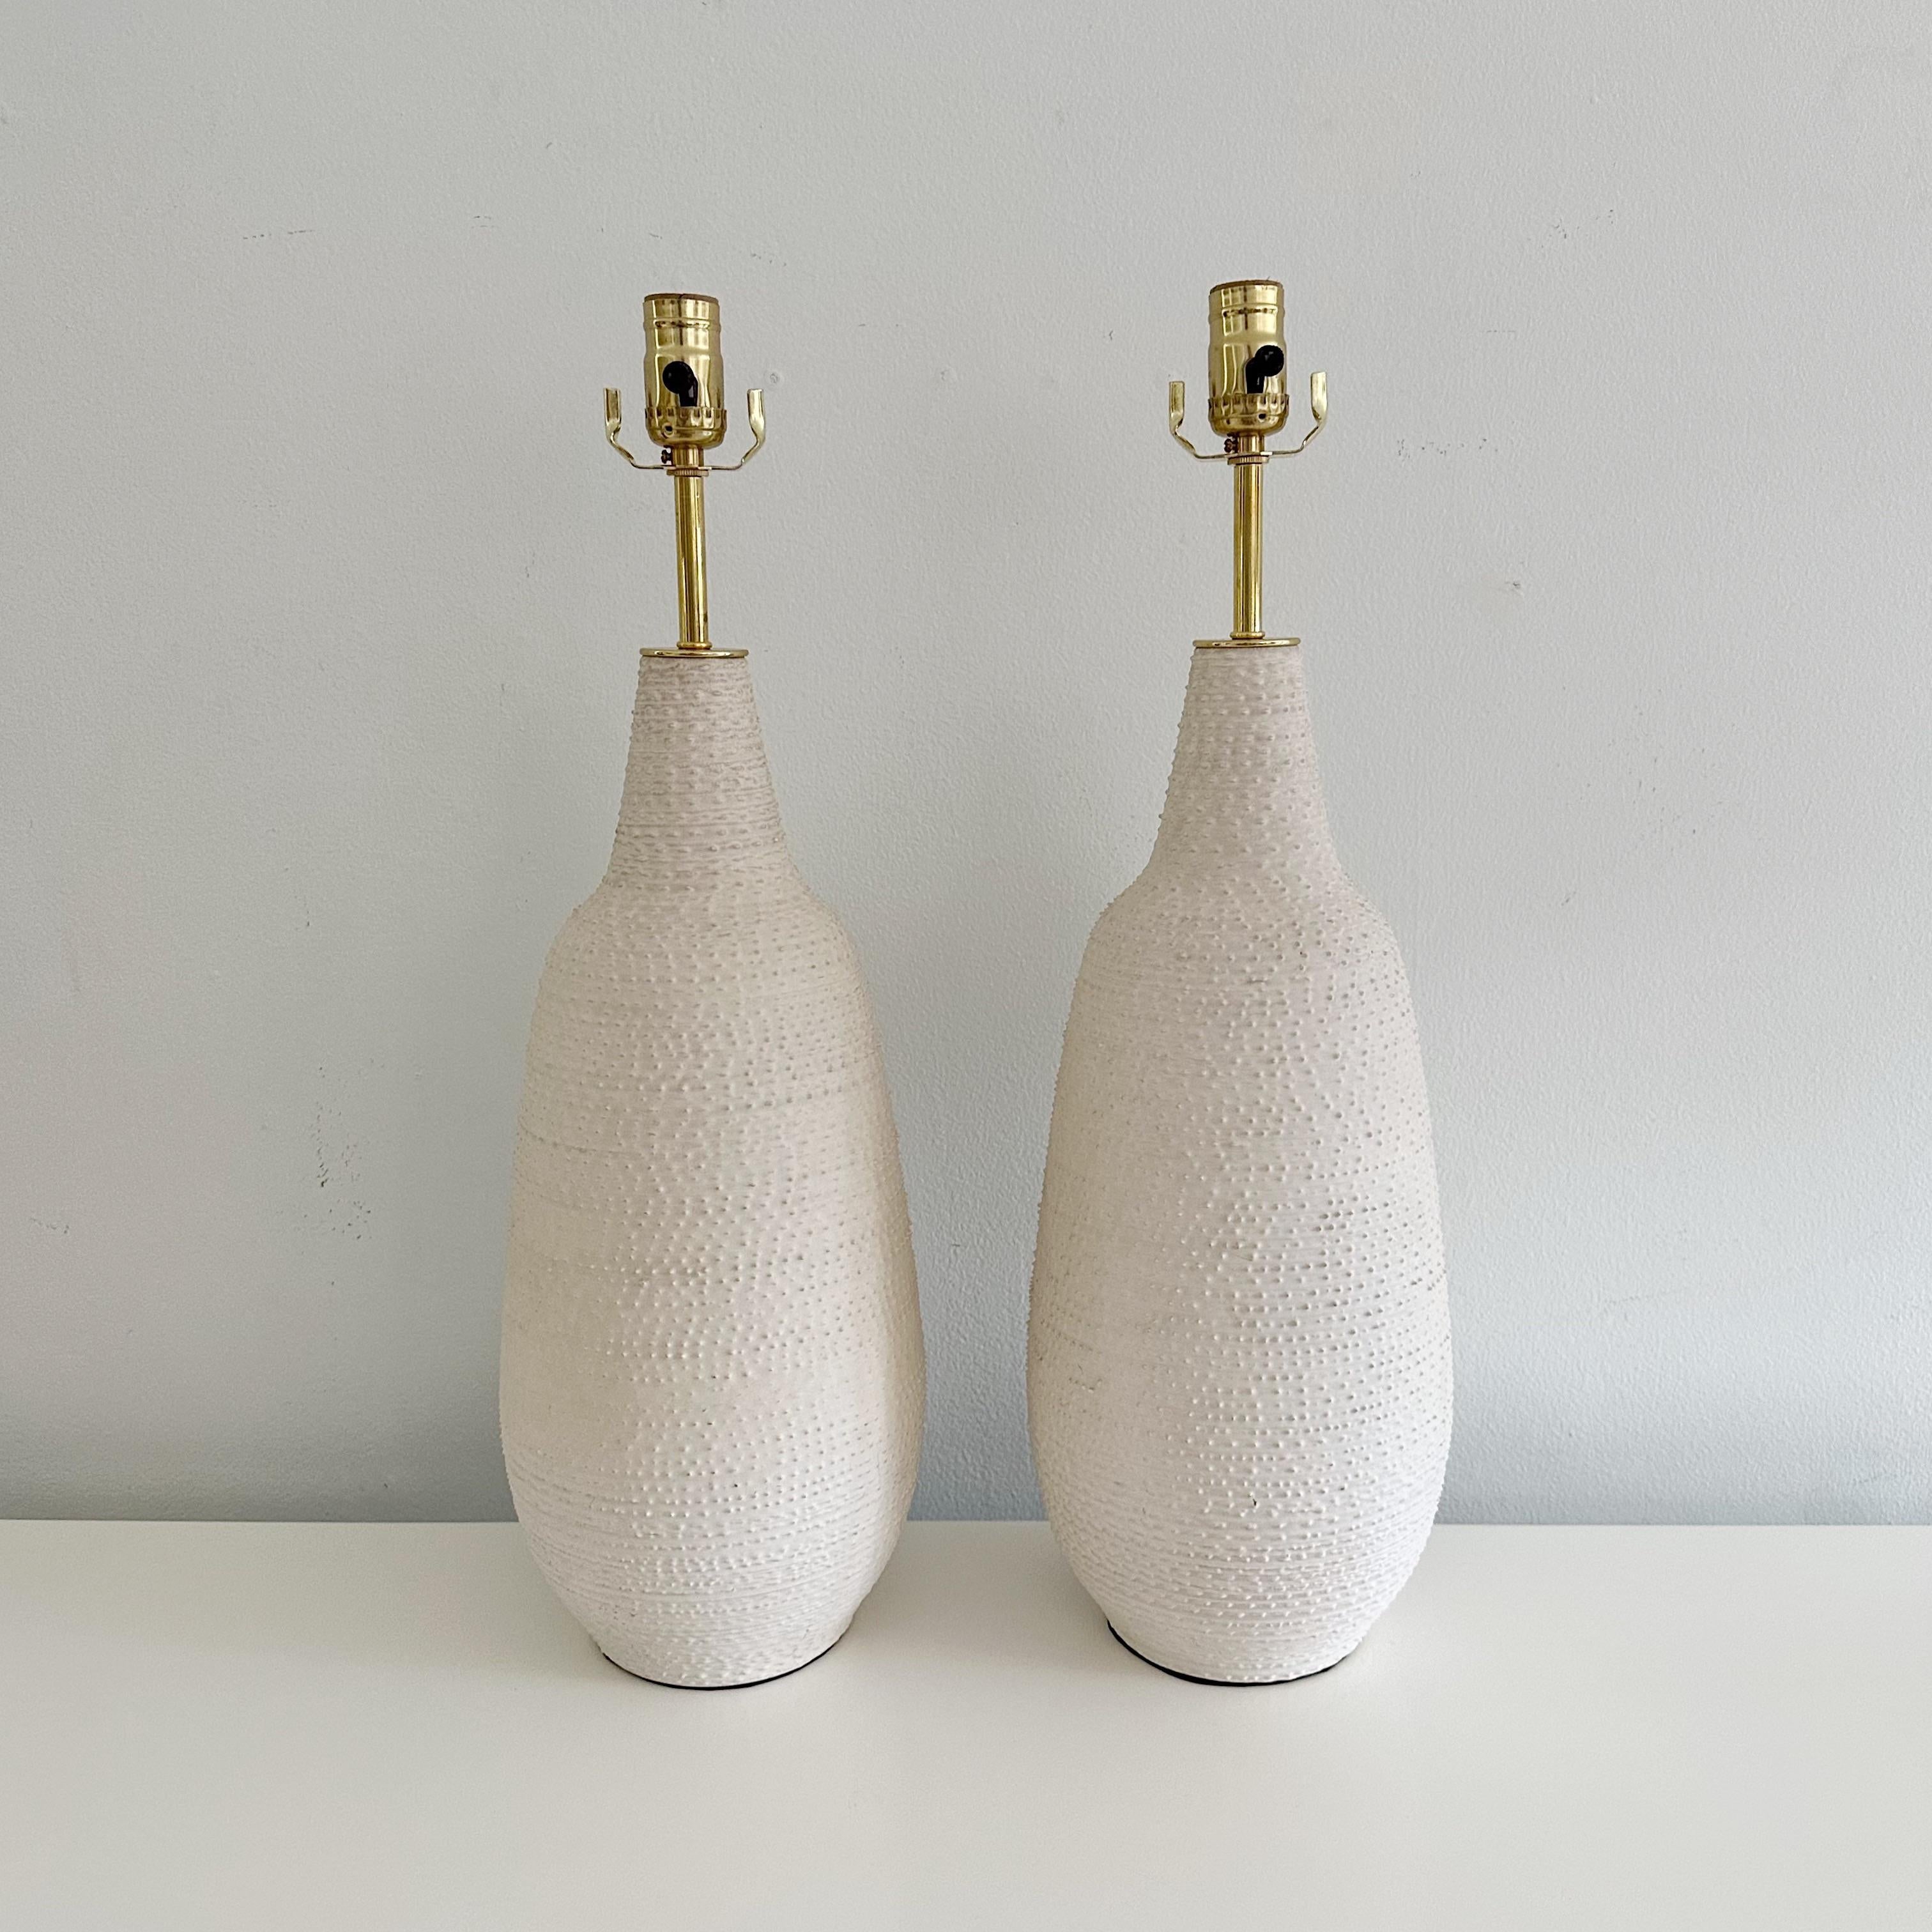 Pair of studio pottery 1960's textured ceramic organic lamps, newly rewired with French silk twist taupe cords and solid brass fittings. Unsigned